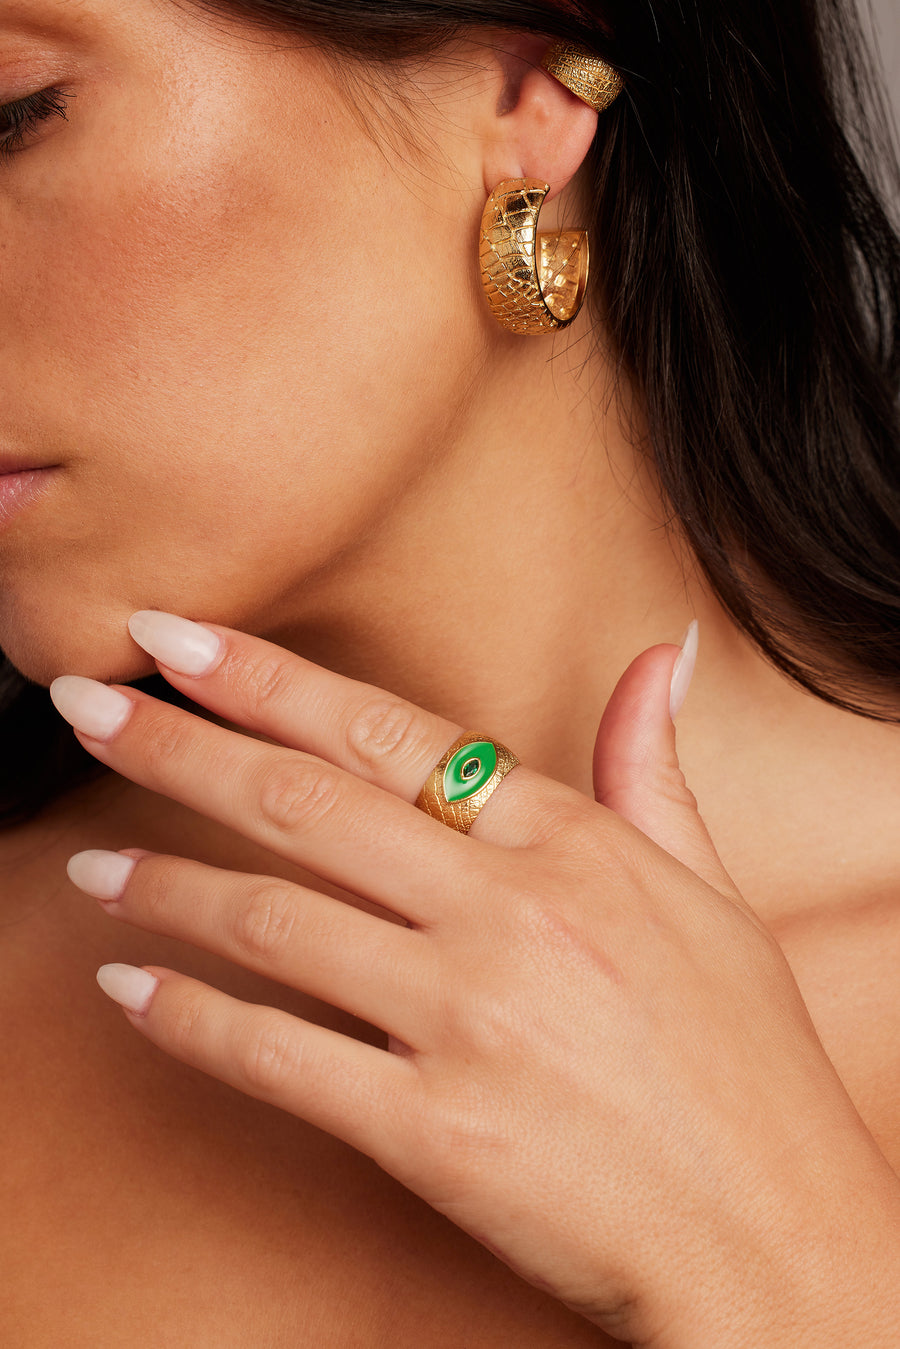 Model wearing the Emerald Eye Cigar Band Ring in gold